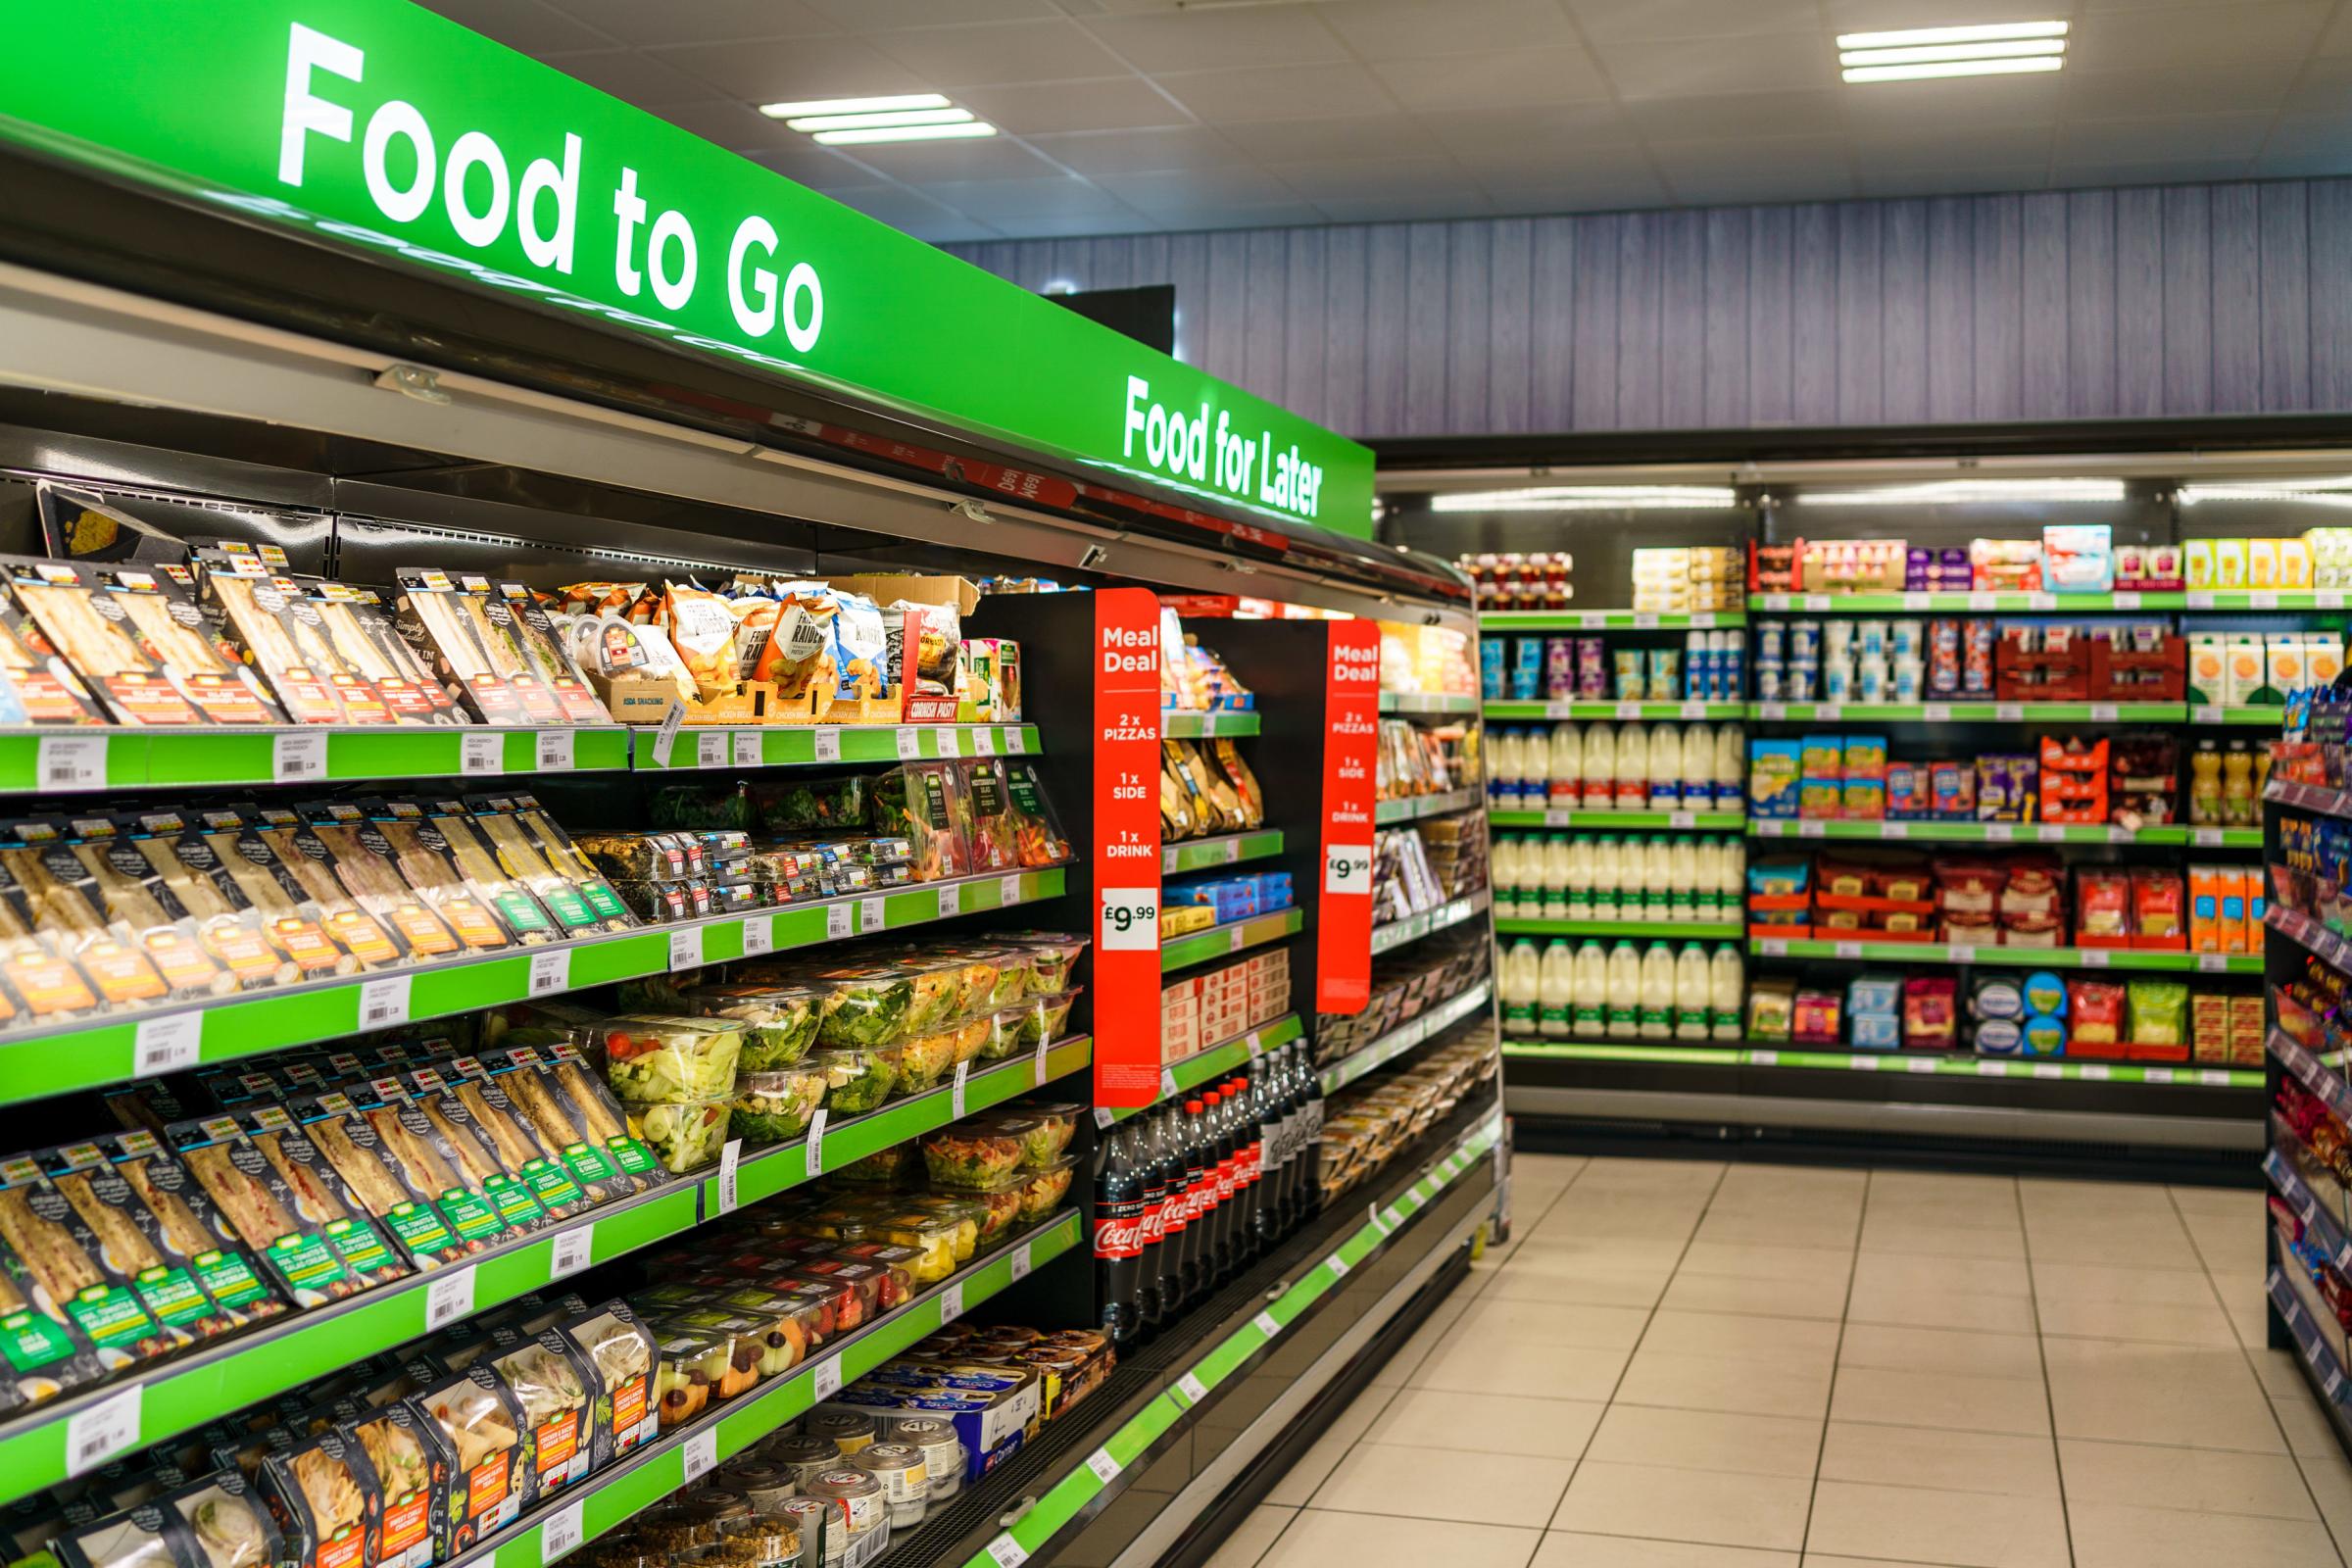 Popular Asda products can be purchased at these select stores